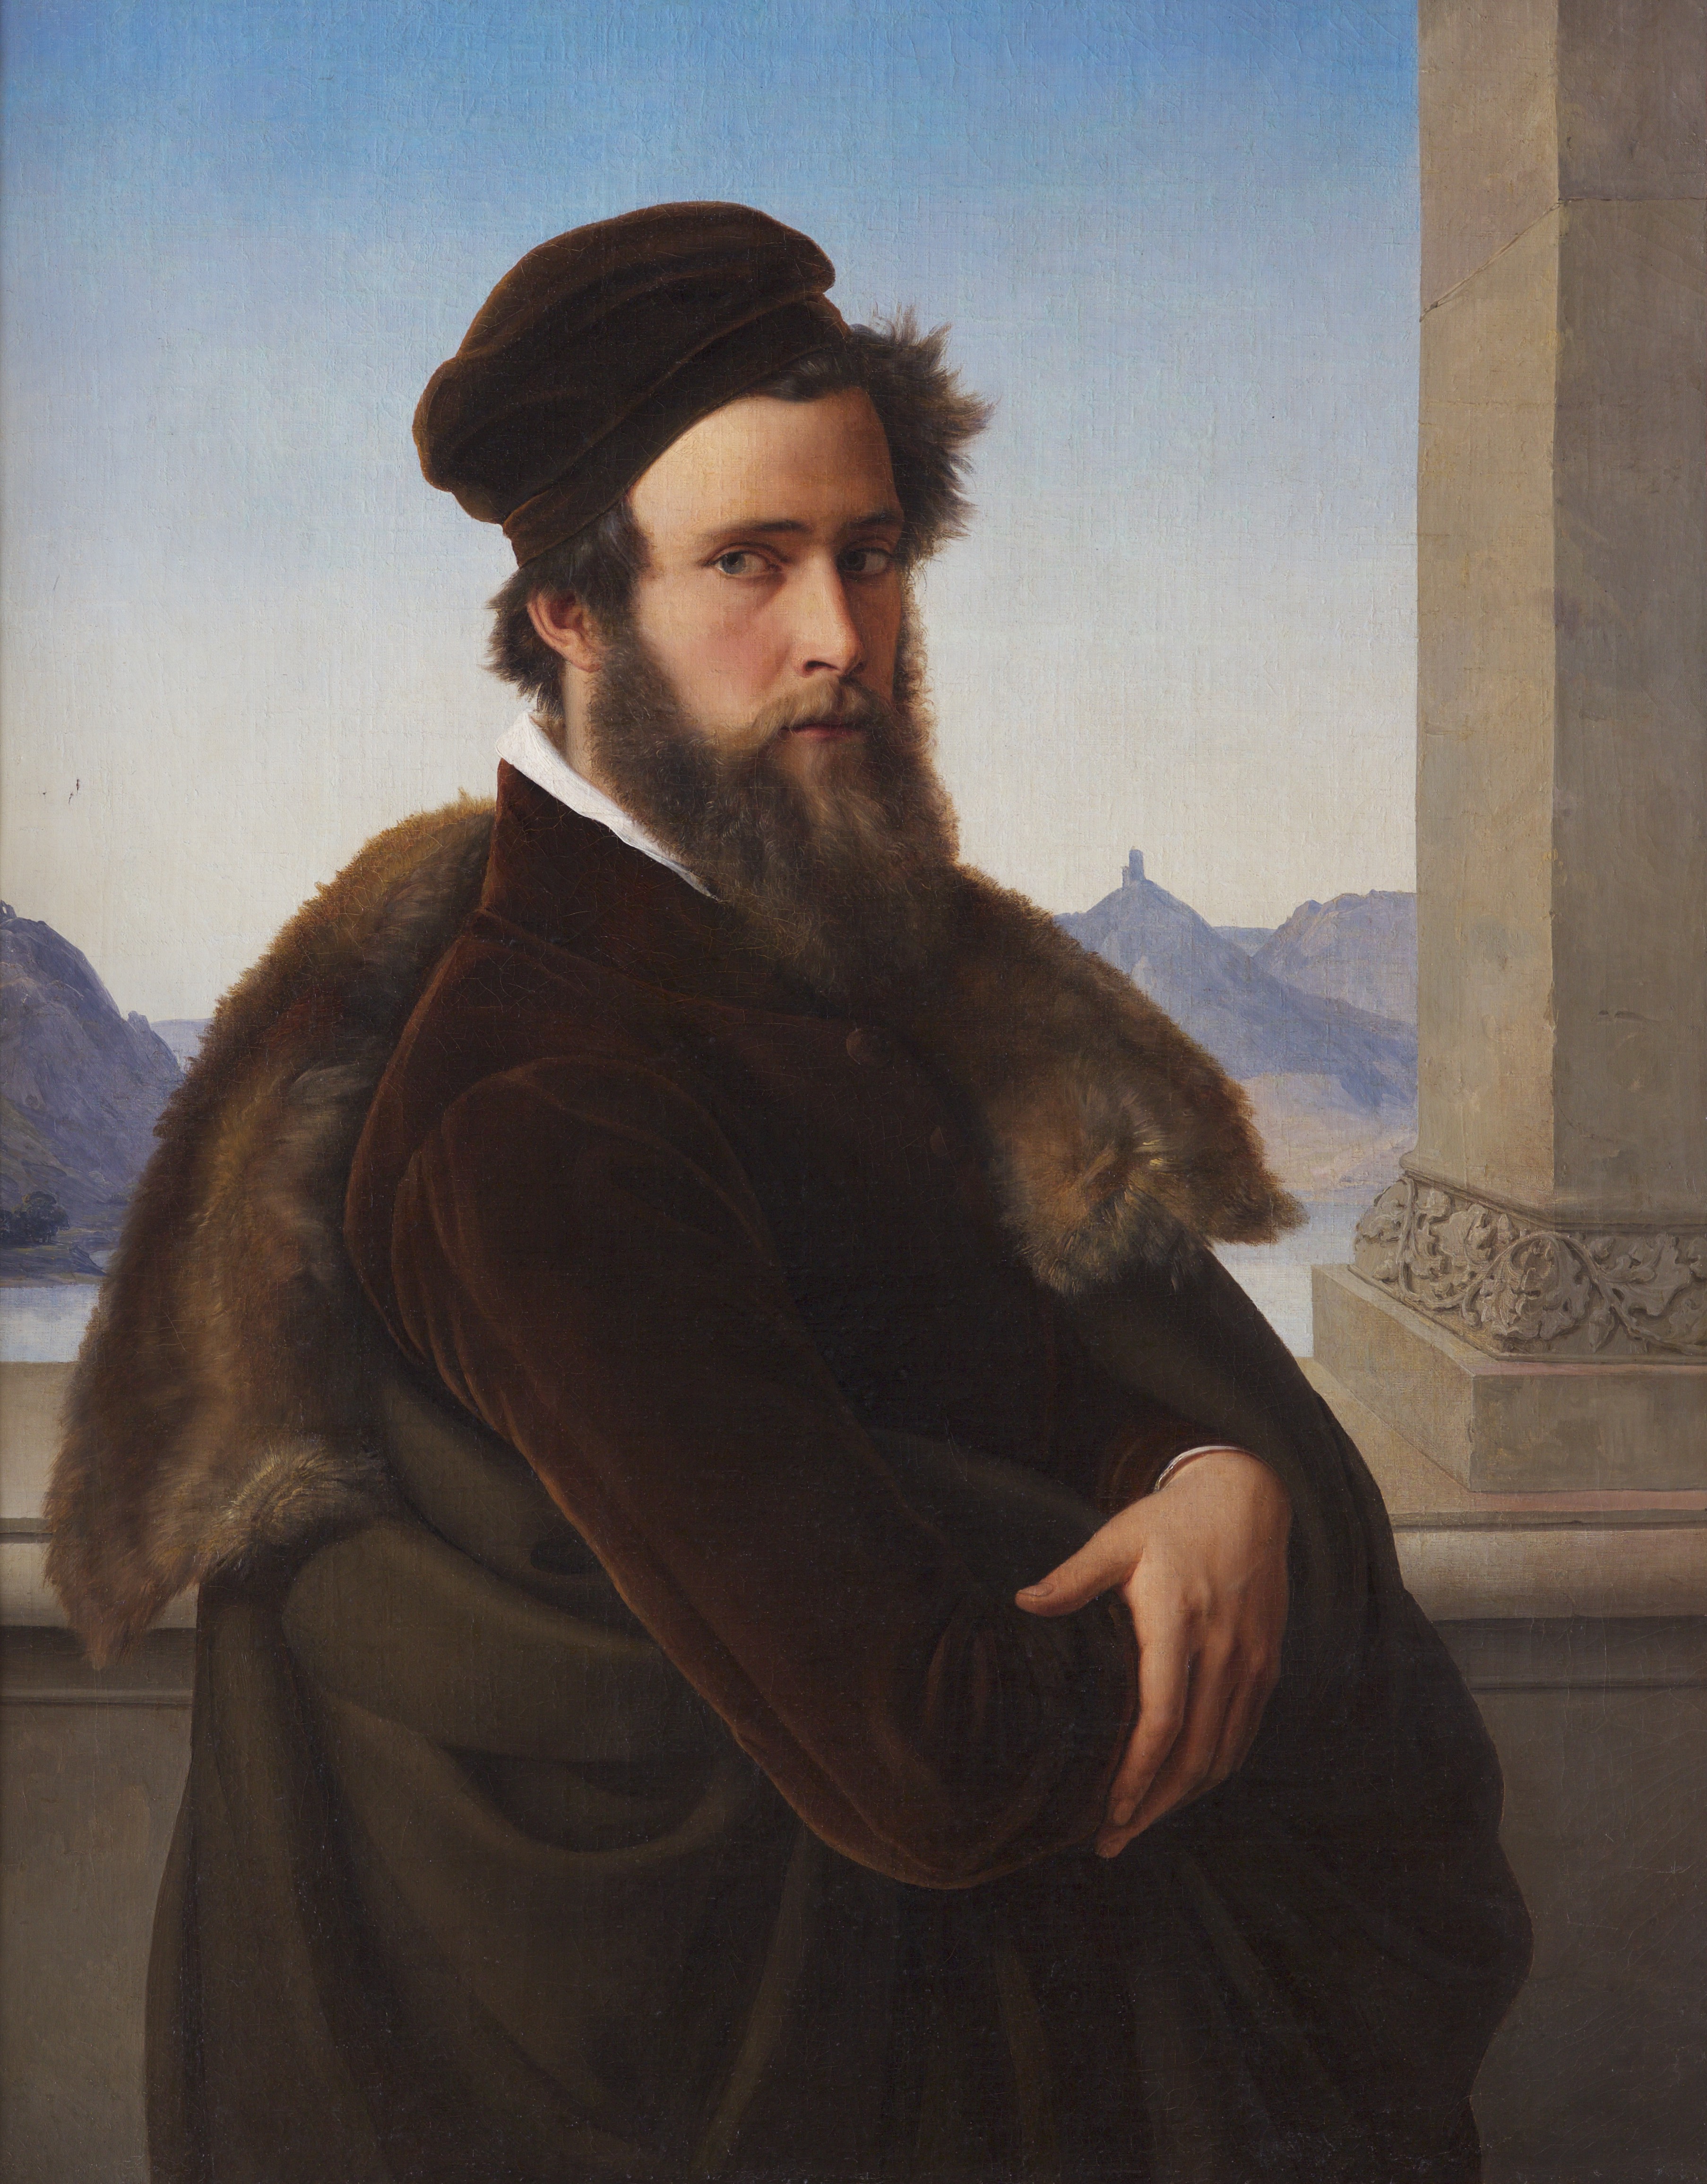 Secrets of 1830 Germany, Art the Schadow Wilhelm – Portraiture a and Man: of Mystery in circa